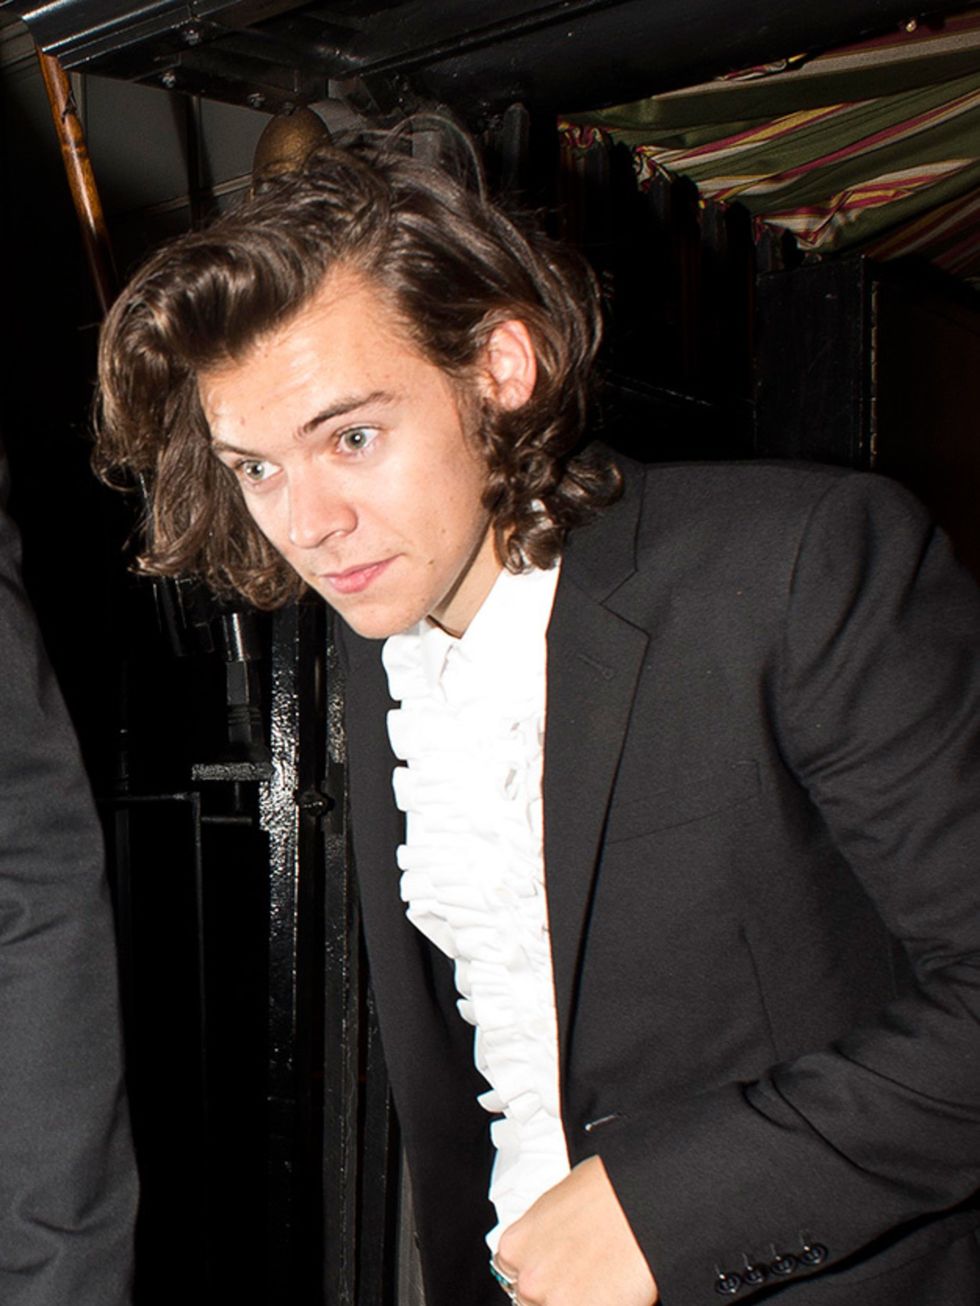 <p>Harry Styles</p>

<p>Look at that volume, the nonchalant sweep of the side fringe. We&#39;ve got hair envy, bad.</p>